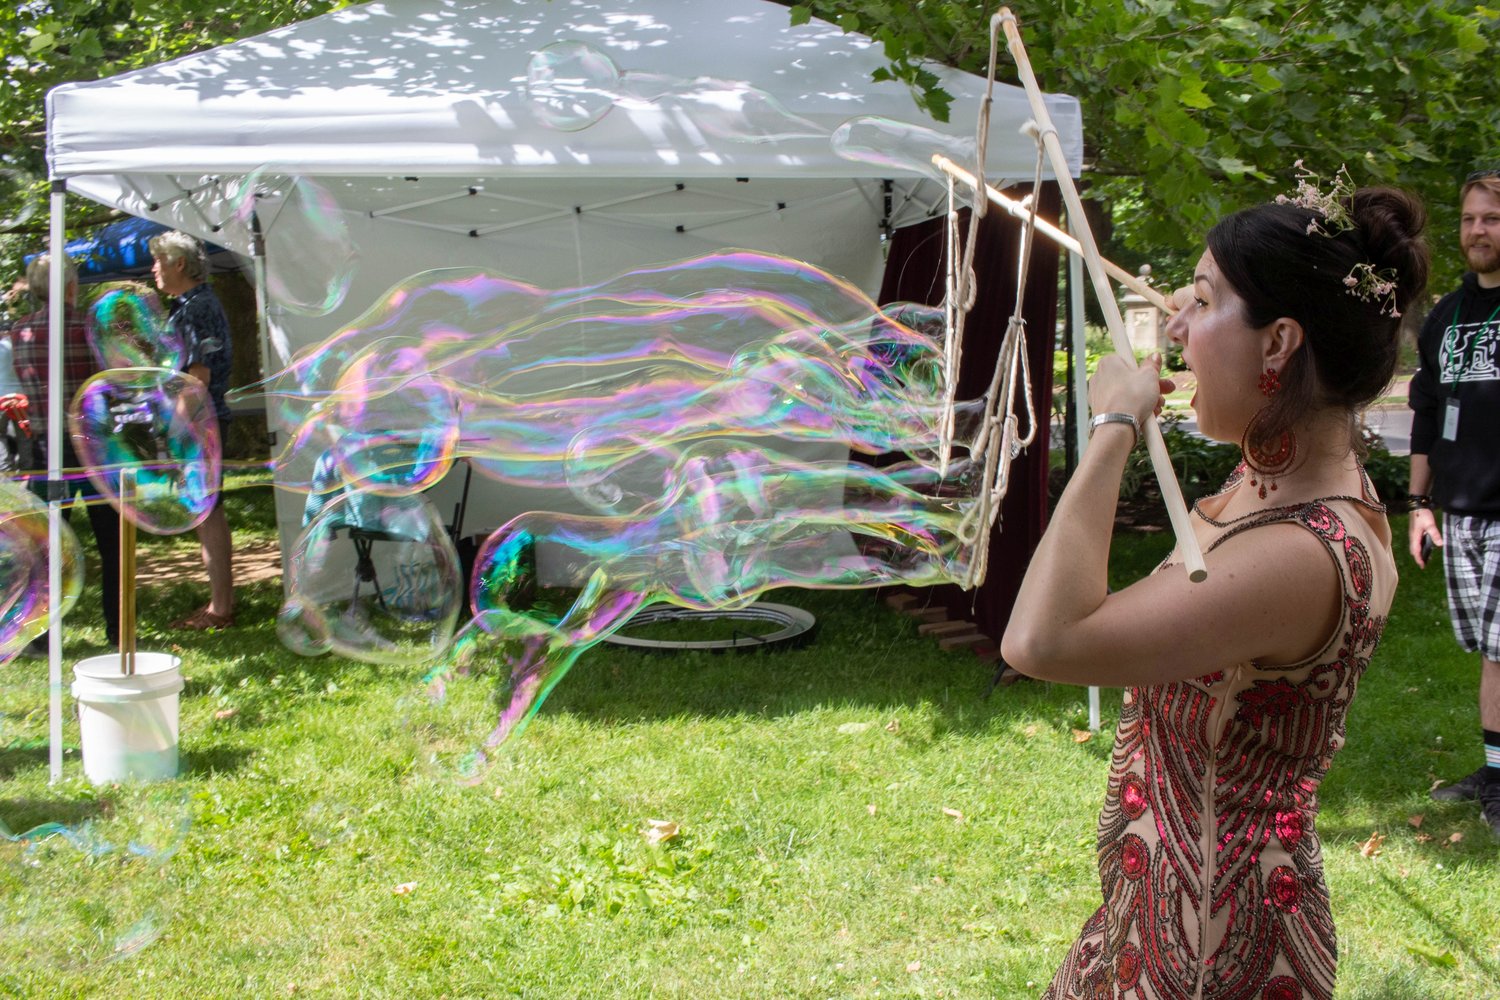 “Bubble Witch” Lindsey Noel entertains during the 10th anniversary celebration, June 18, of The Community Labyrinth at The Michener Art Museum in Doylestown.